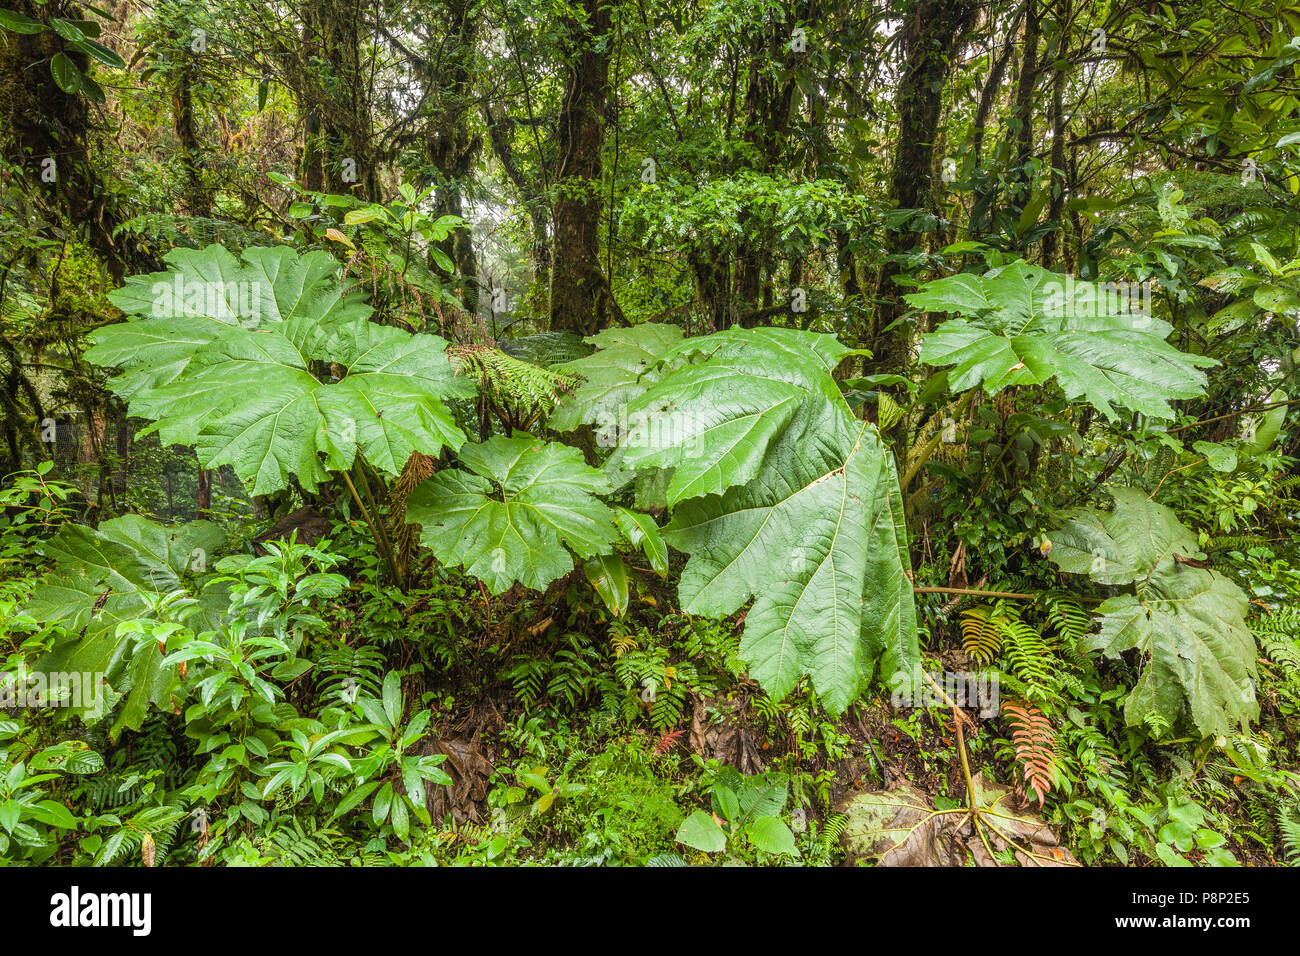 Tropical Cloud forest at Santa Elena in Costa Rica Stock Photo